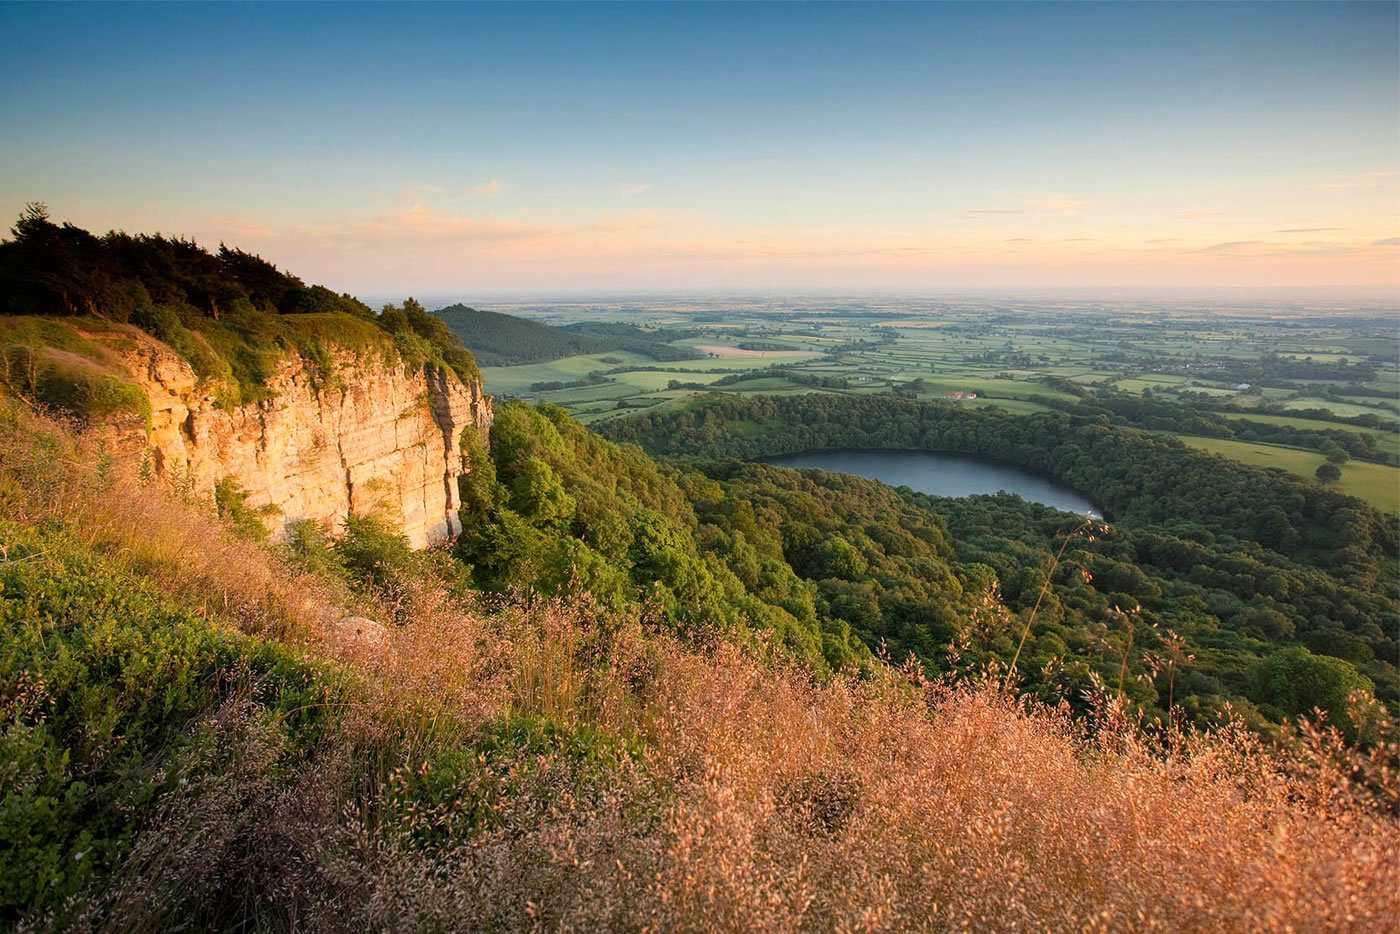 24 Date Ideas For Landscape Lovers In The North Of England